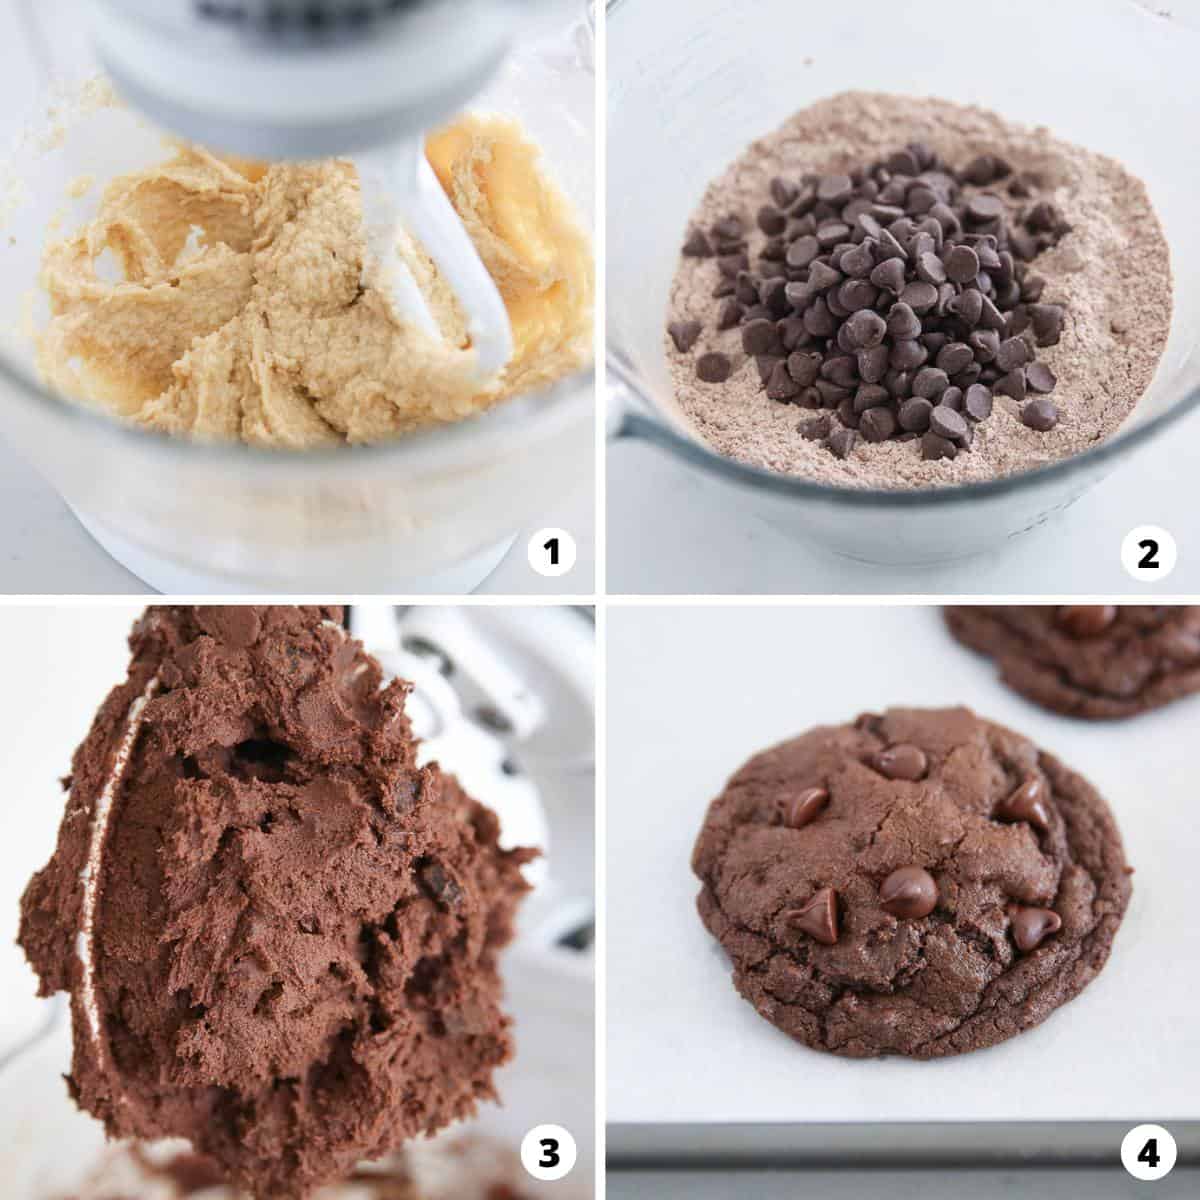 Showing how to make double chocolate chip cookies in a 4 step collage.